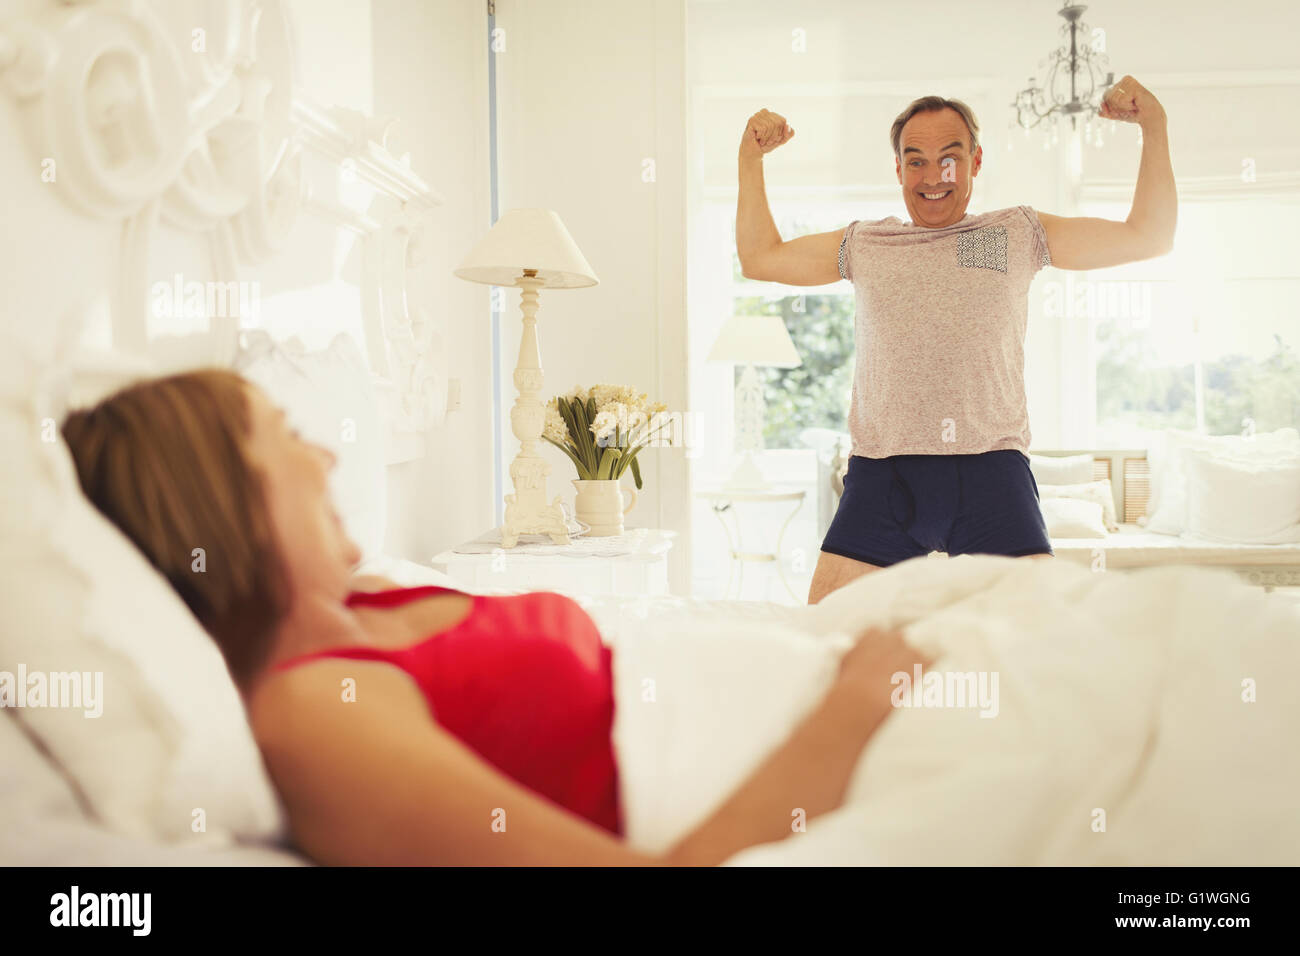 Playful mature man flexing muscles for wife in bedroom Stock Photo